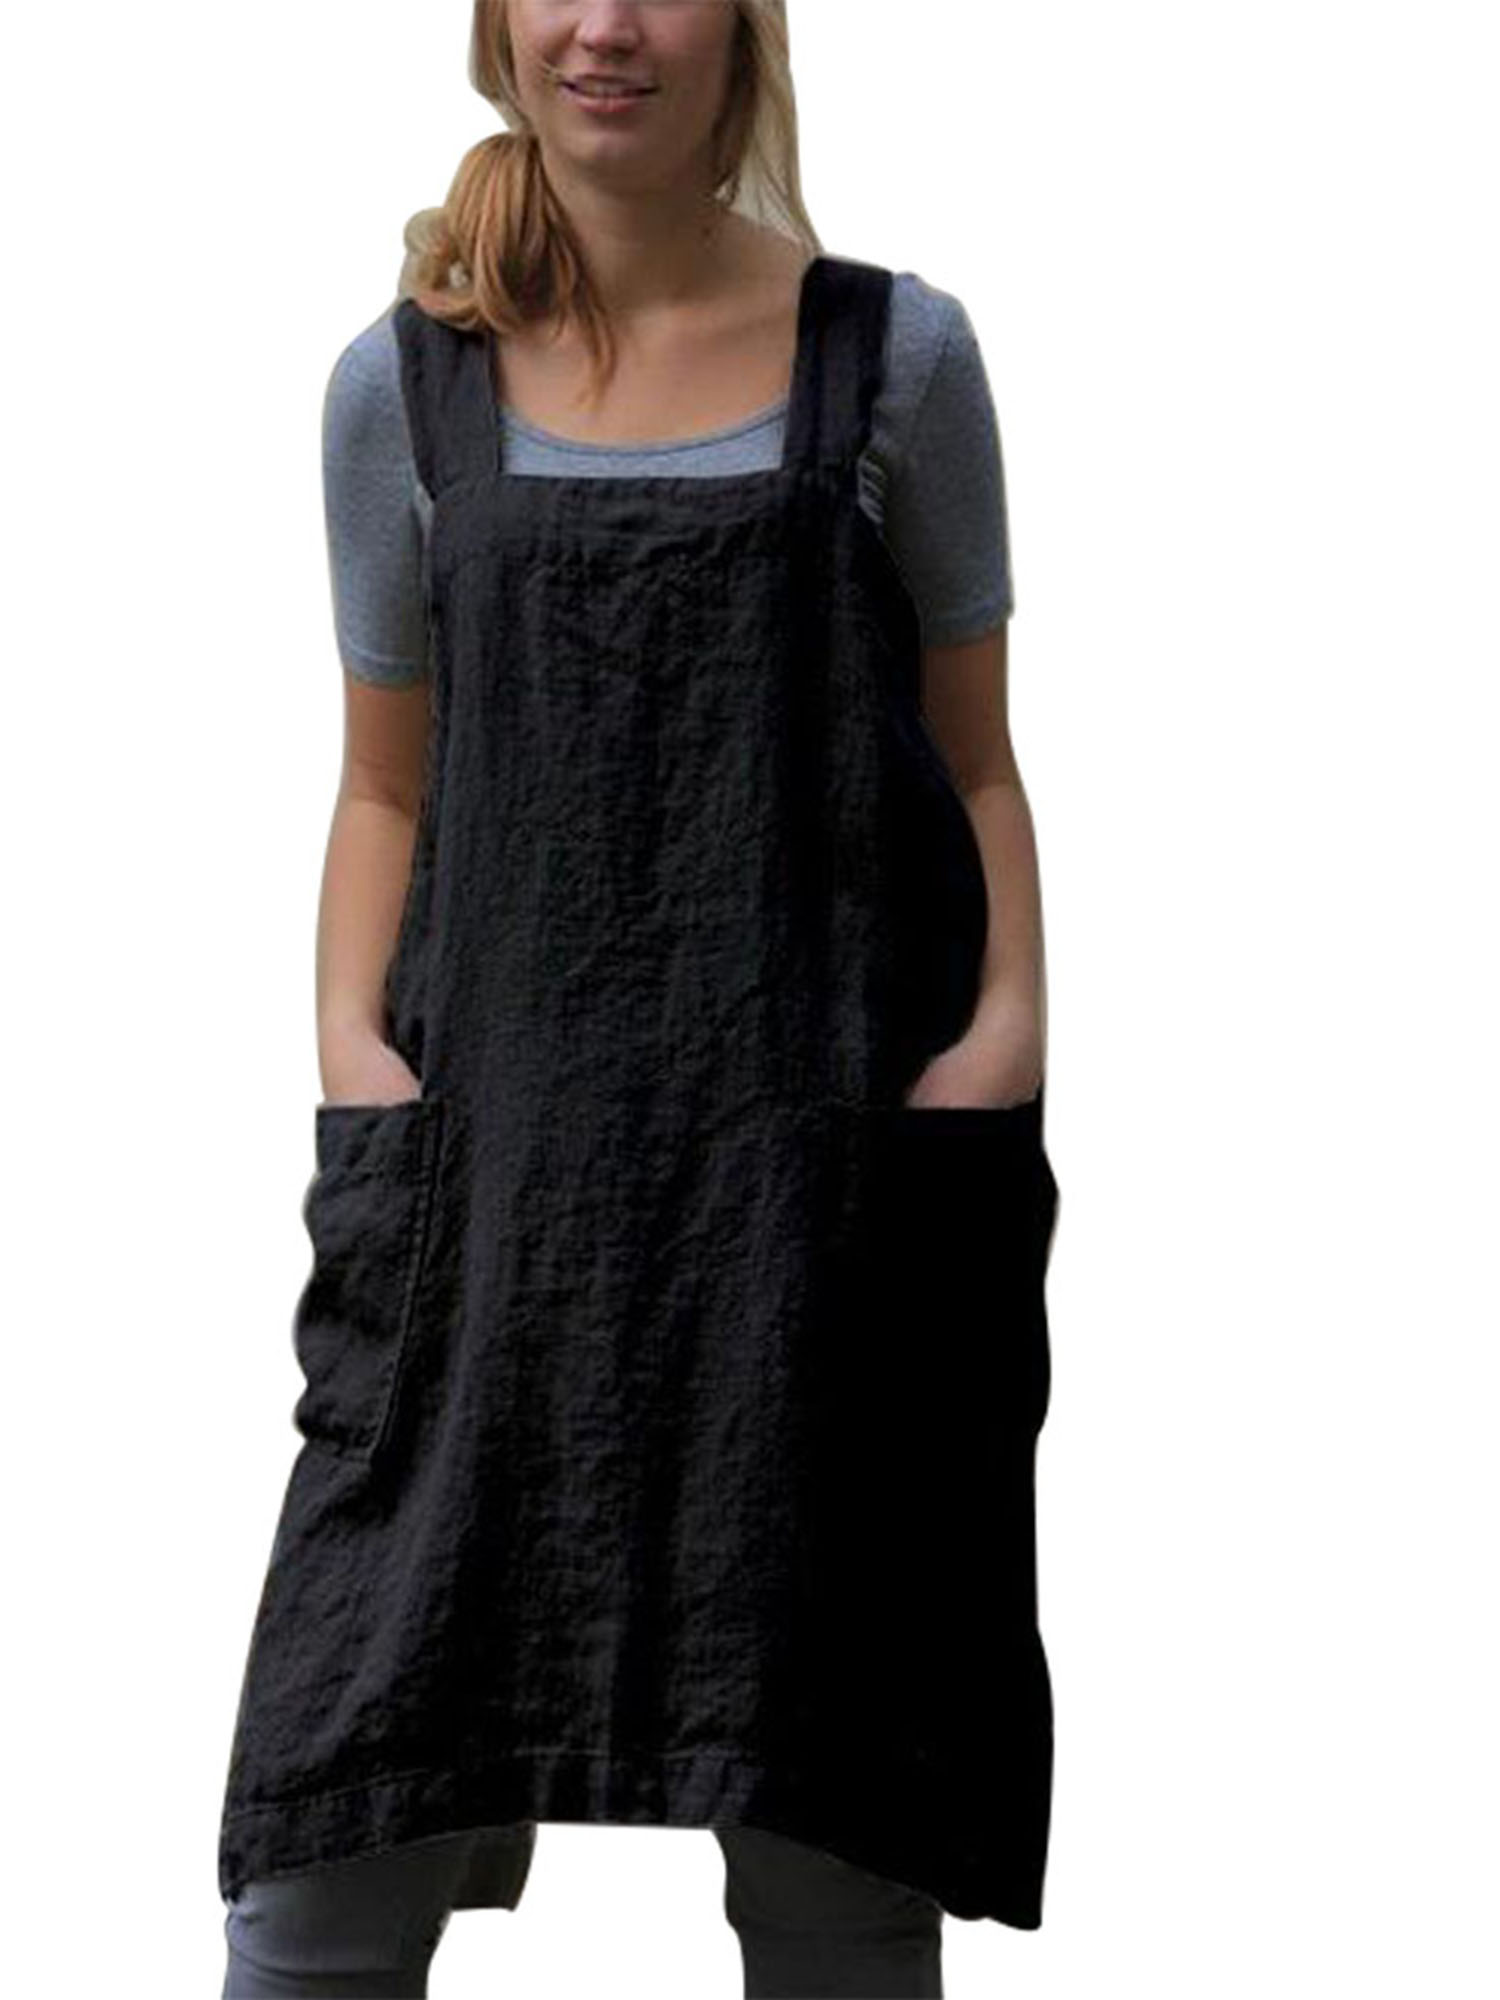 Listenwind Women’s Pinafore Square Apron Baking Cooking Gardening Works Cross Back Cotton/Linen Blend Dress with 2 Pockets Large Plus - image 1 of 5